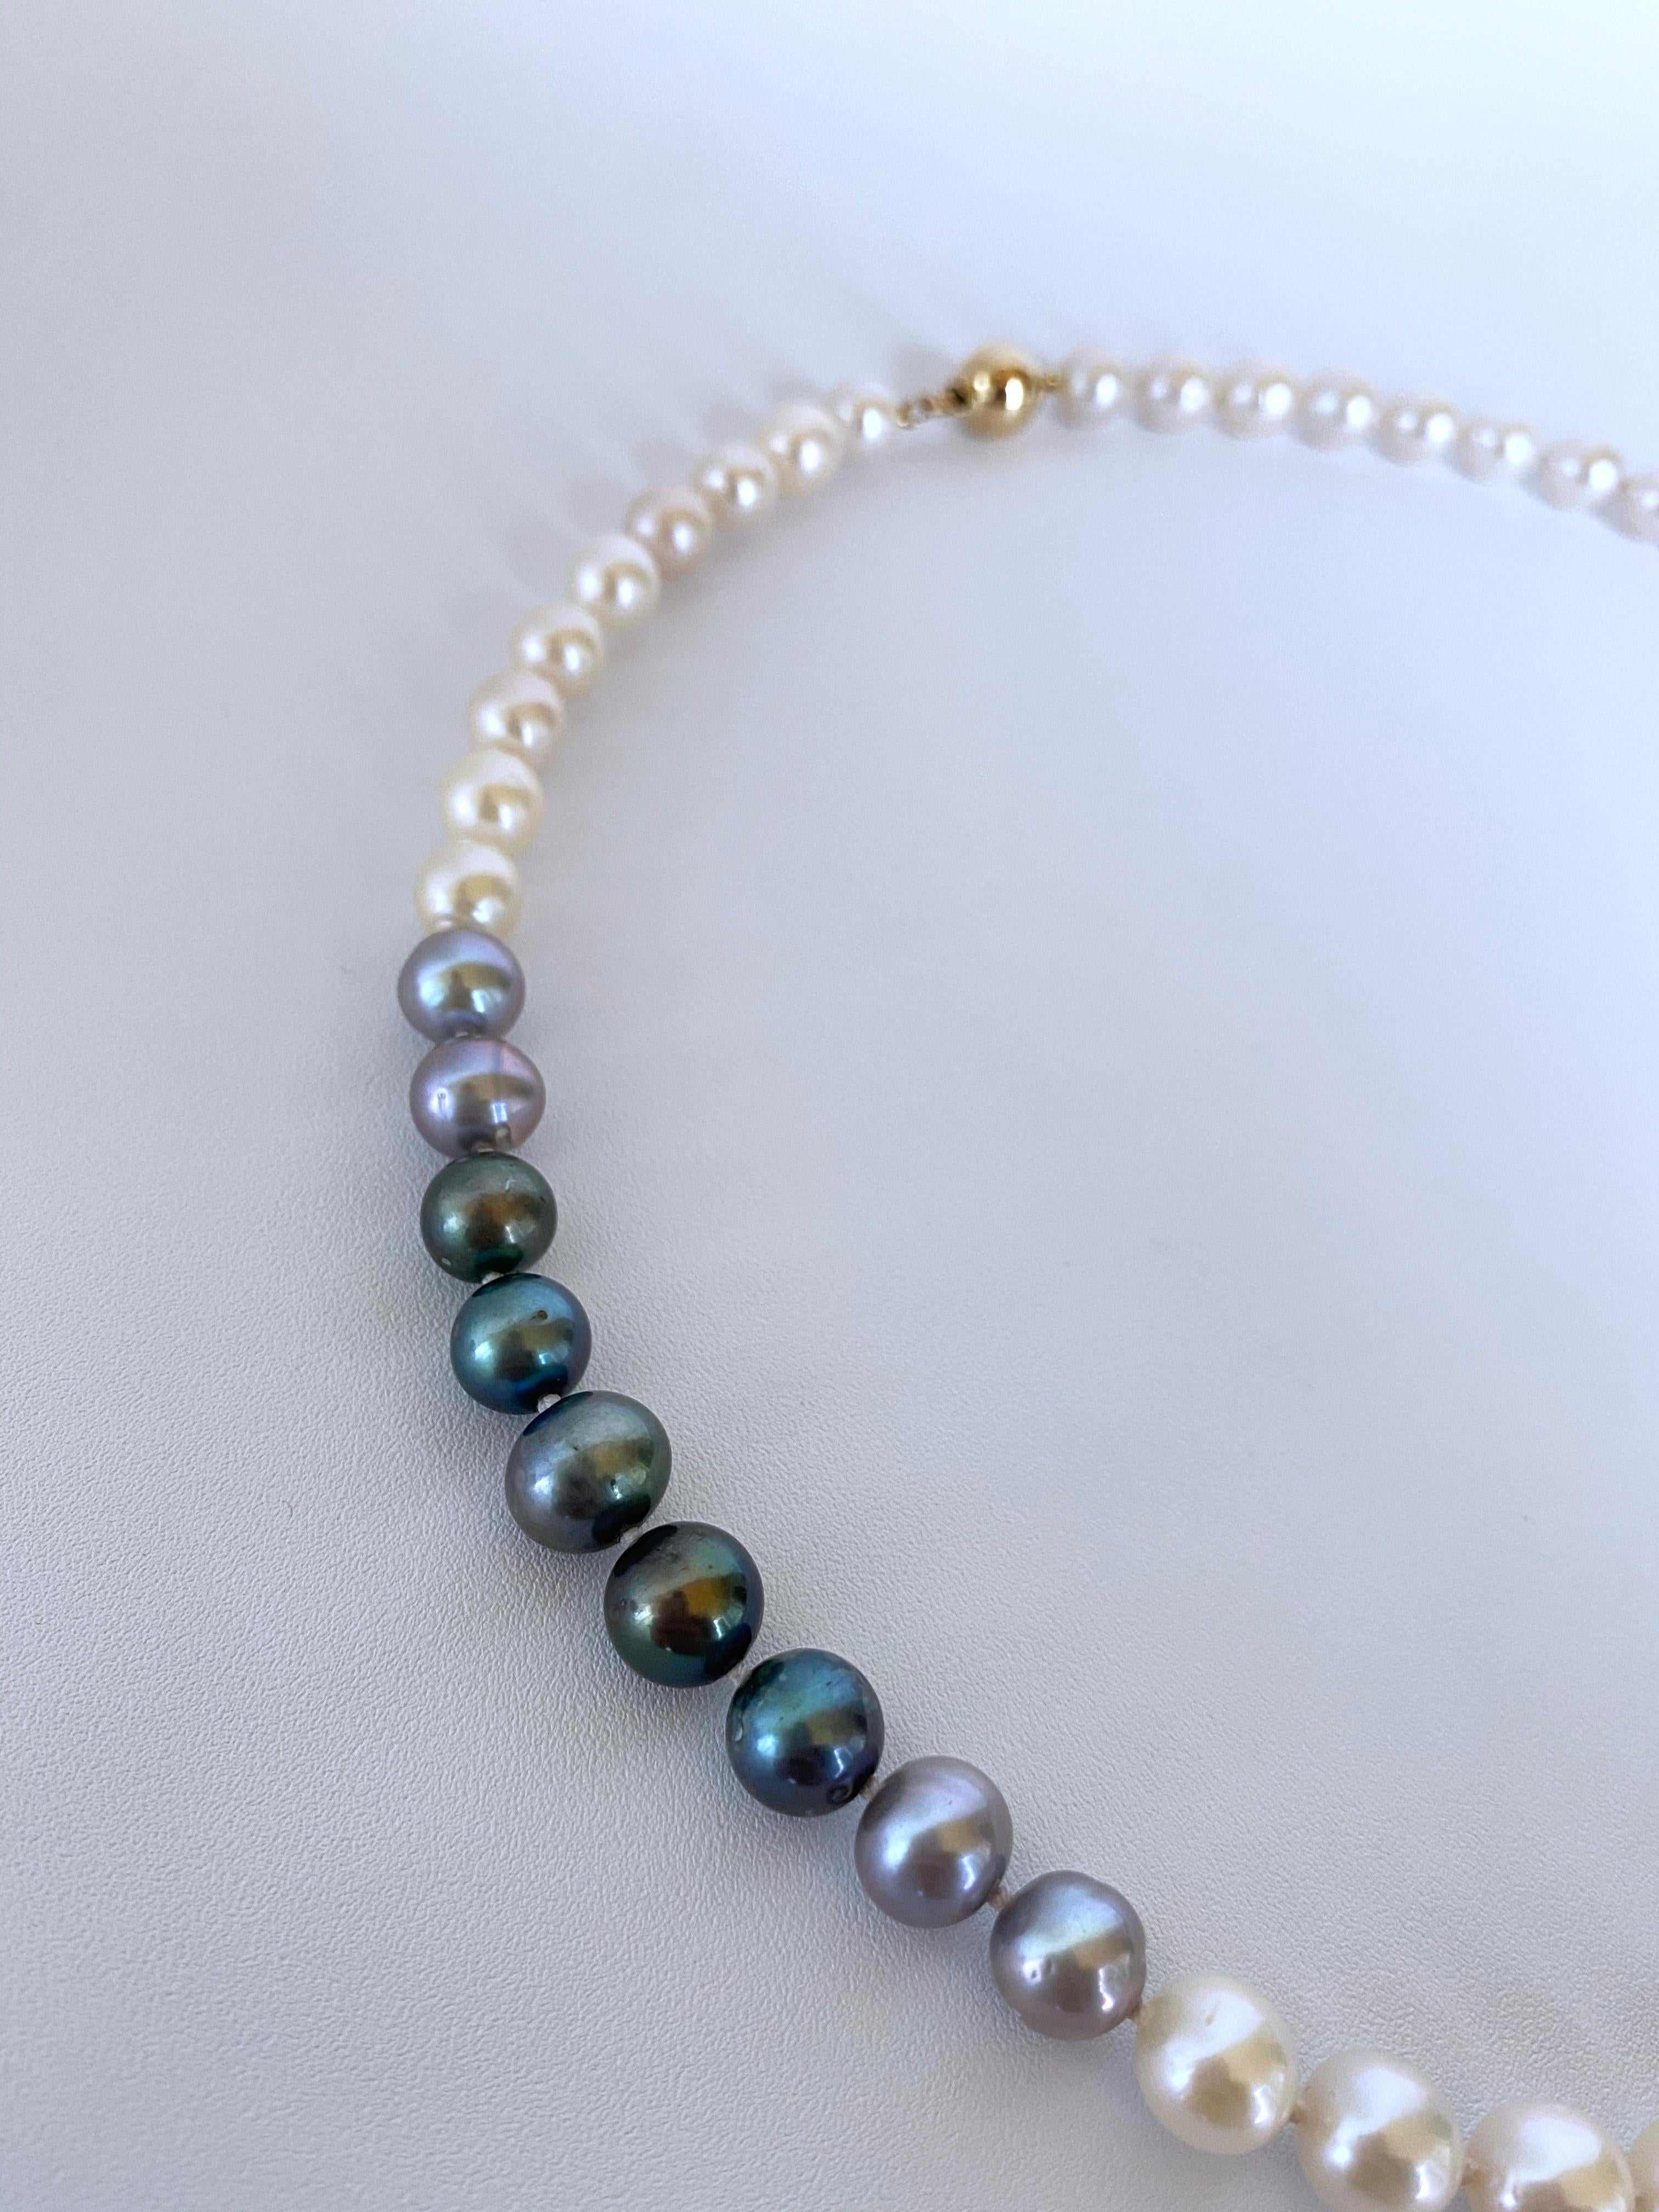 Artisan Marina J. Ombre Pearl Strung Necklace with 14k Yellow Gold